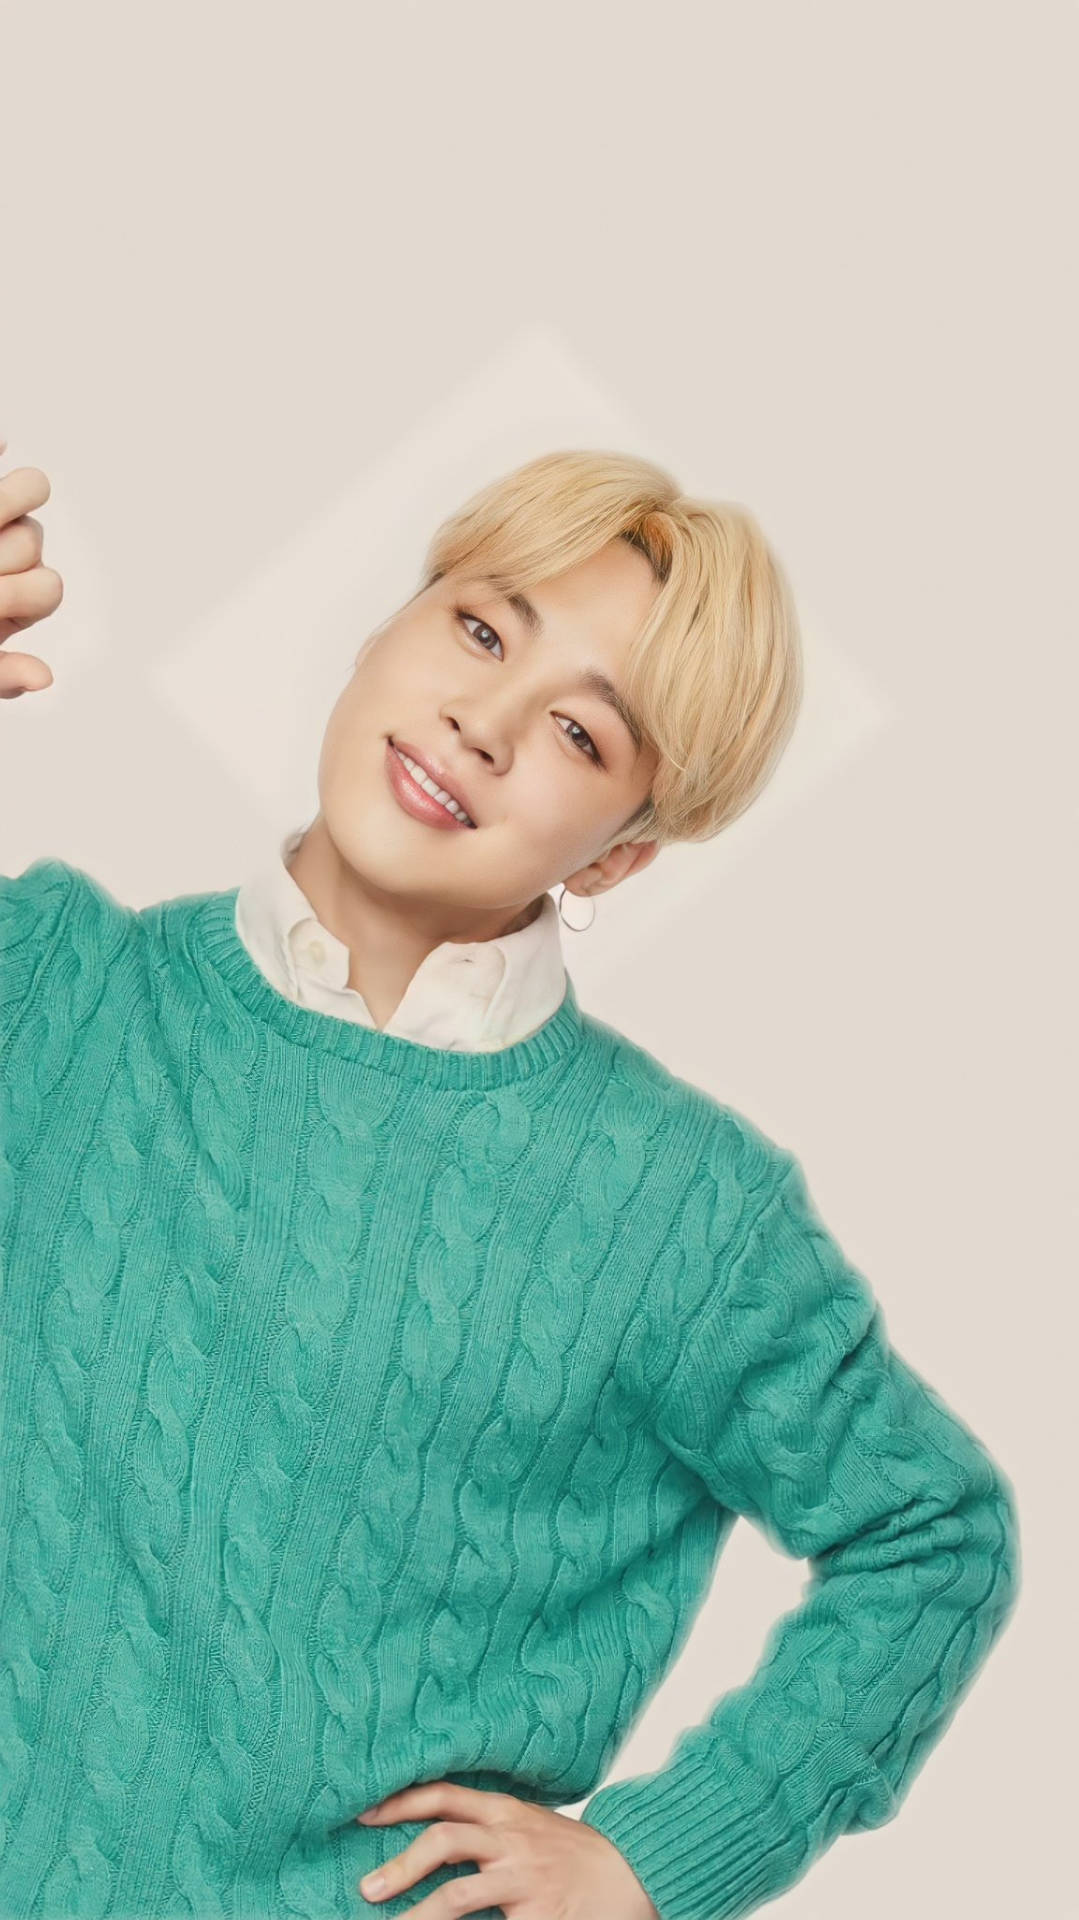 Bts Jimin For Xylitol Background